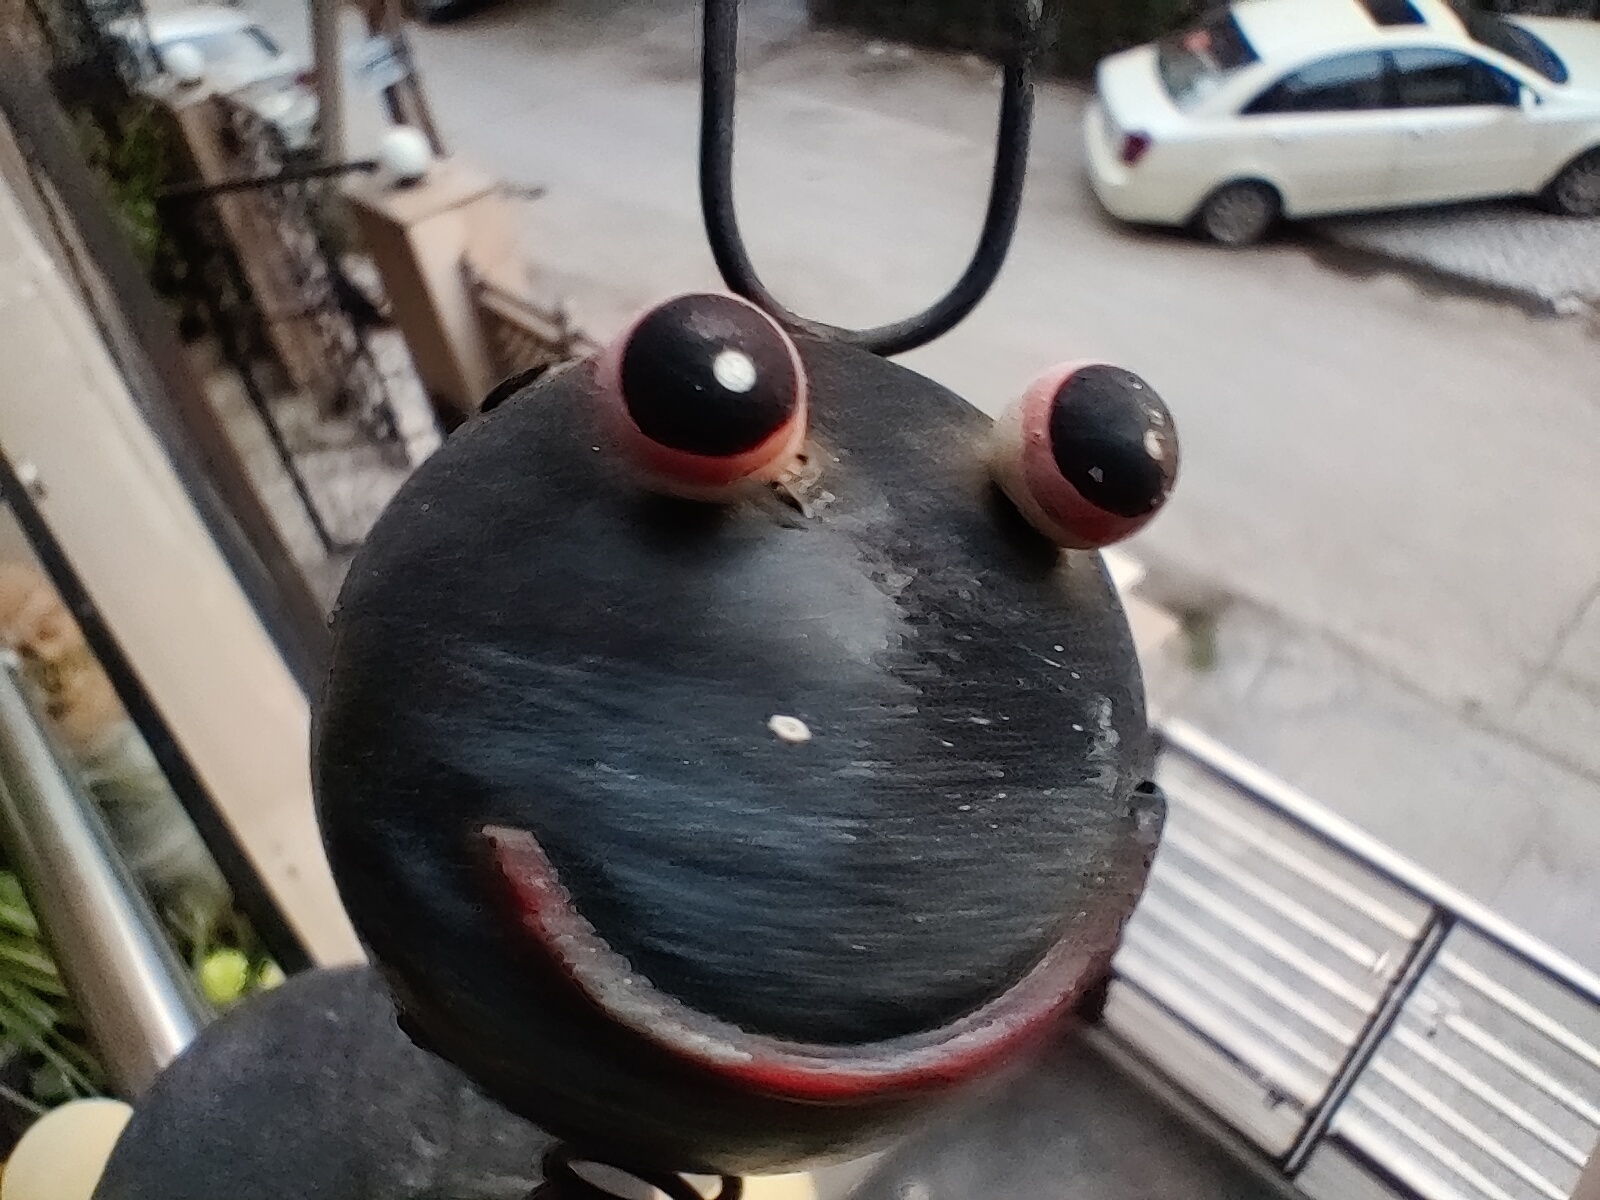 The OnePlus Nord Macro camera show of a metal ornament with a smiley face.